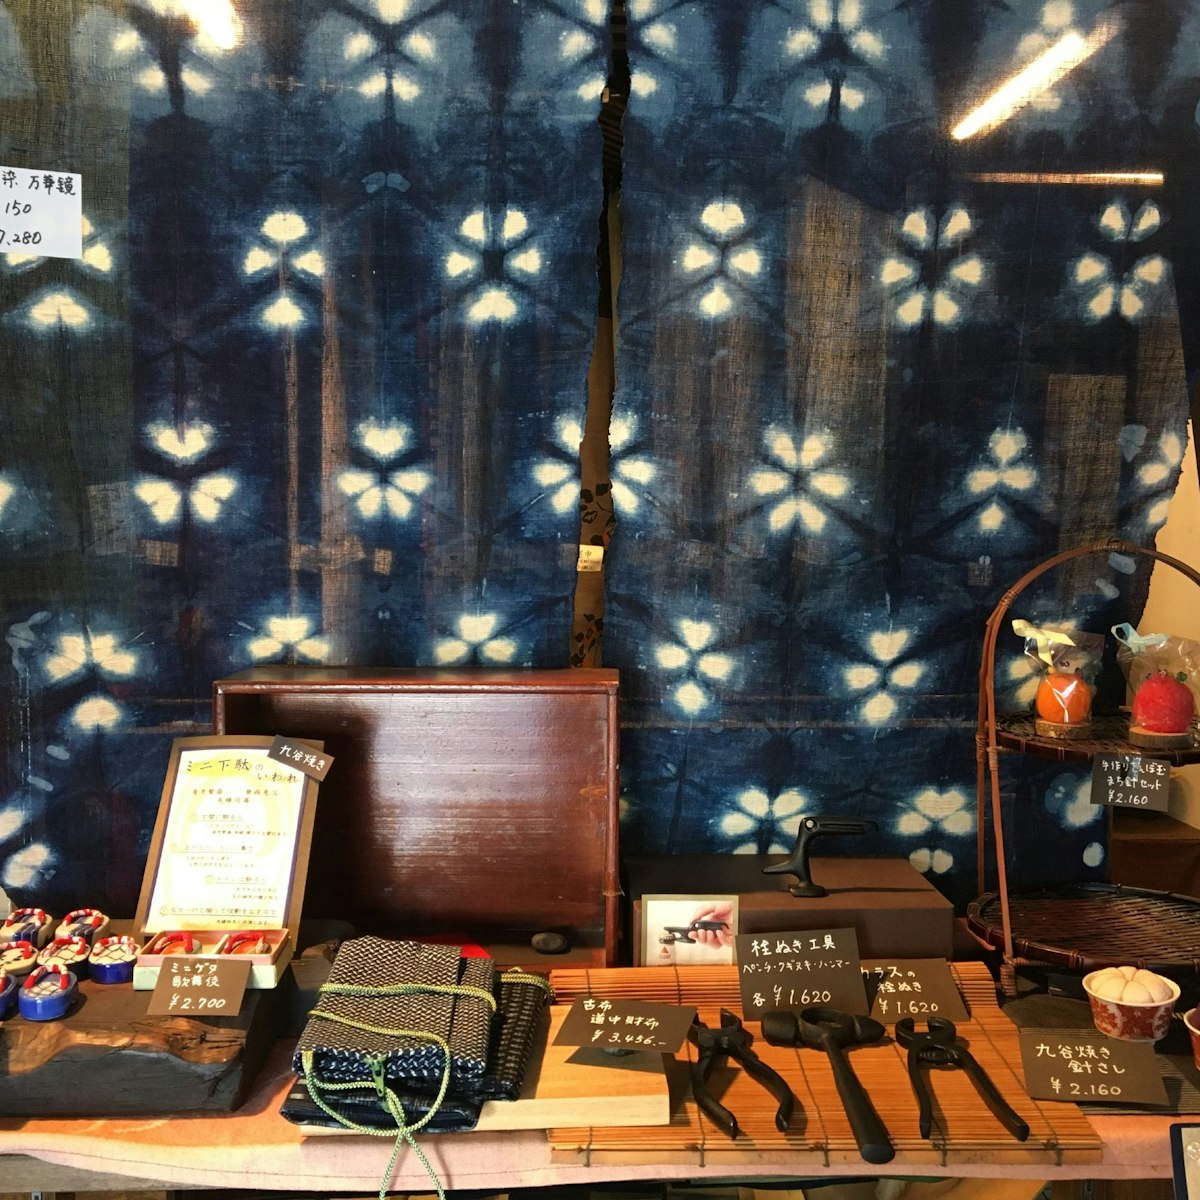 Example of one of the shop curtains (noren) and other wares sold at Bengara, Asakusa & Sumida River.